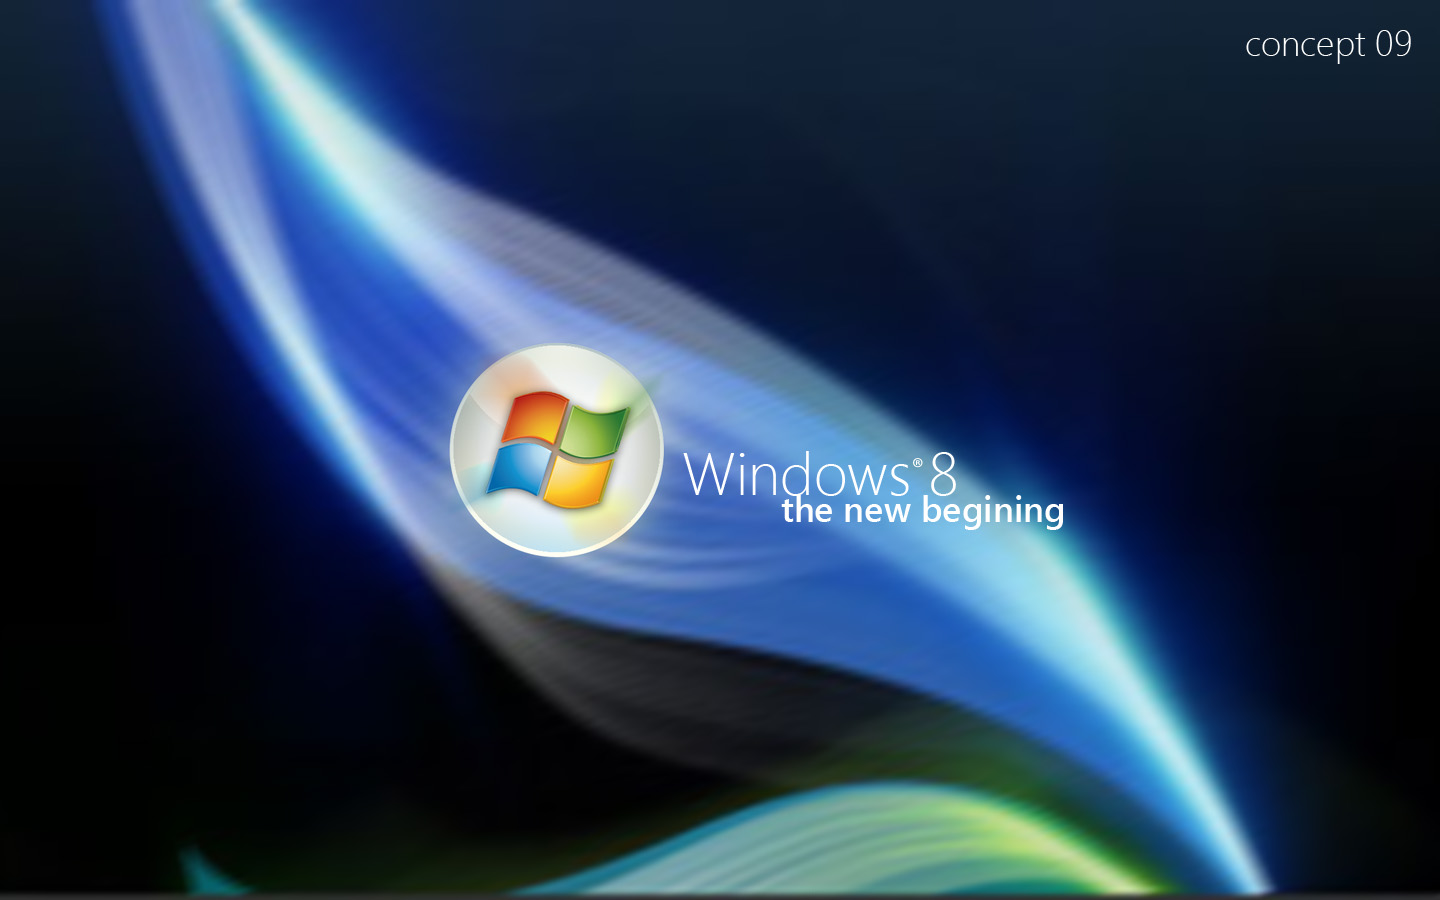 Super Cool Windows 8 Wallpapers HD   Ars Pc Zone